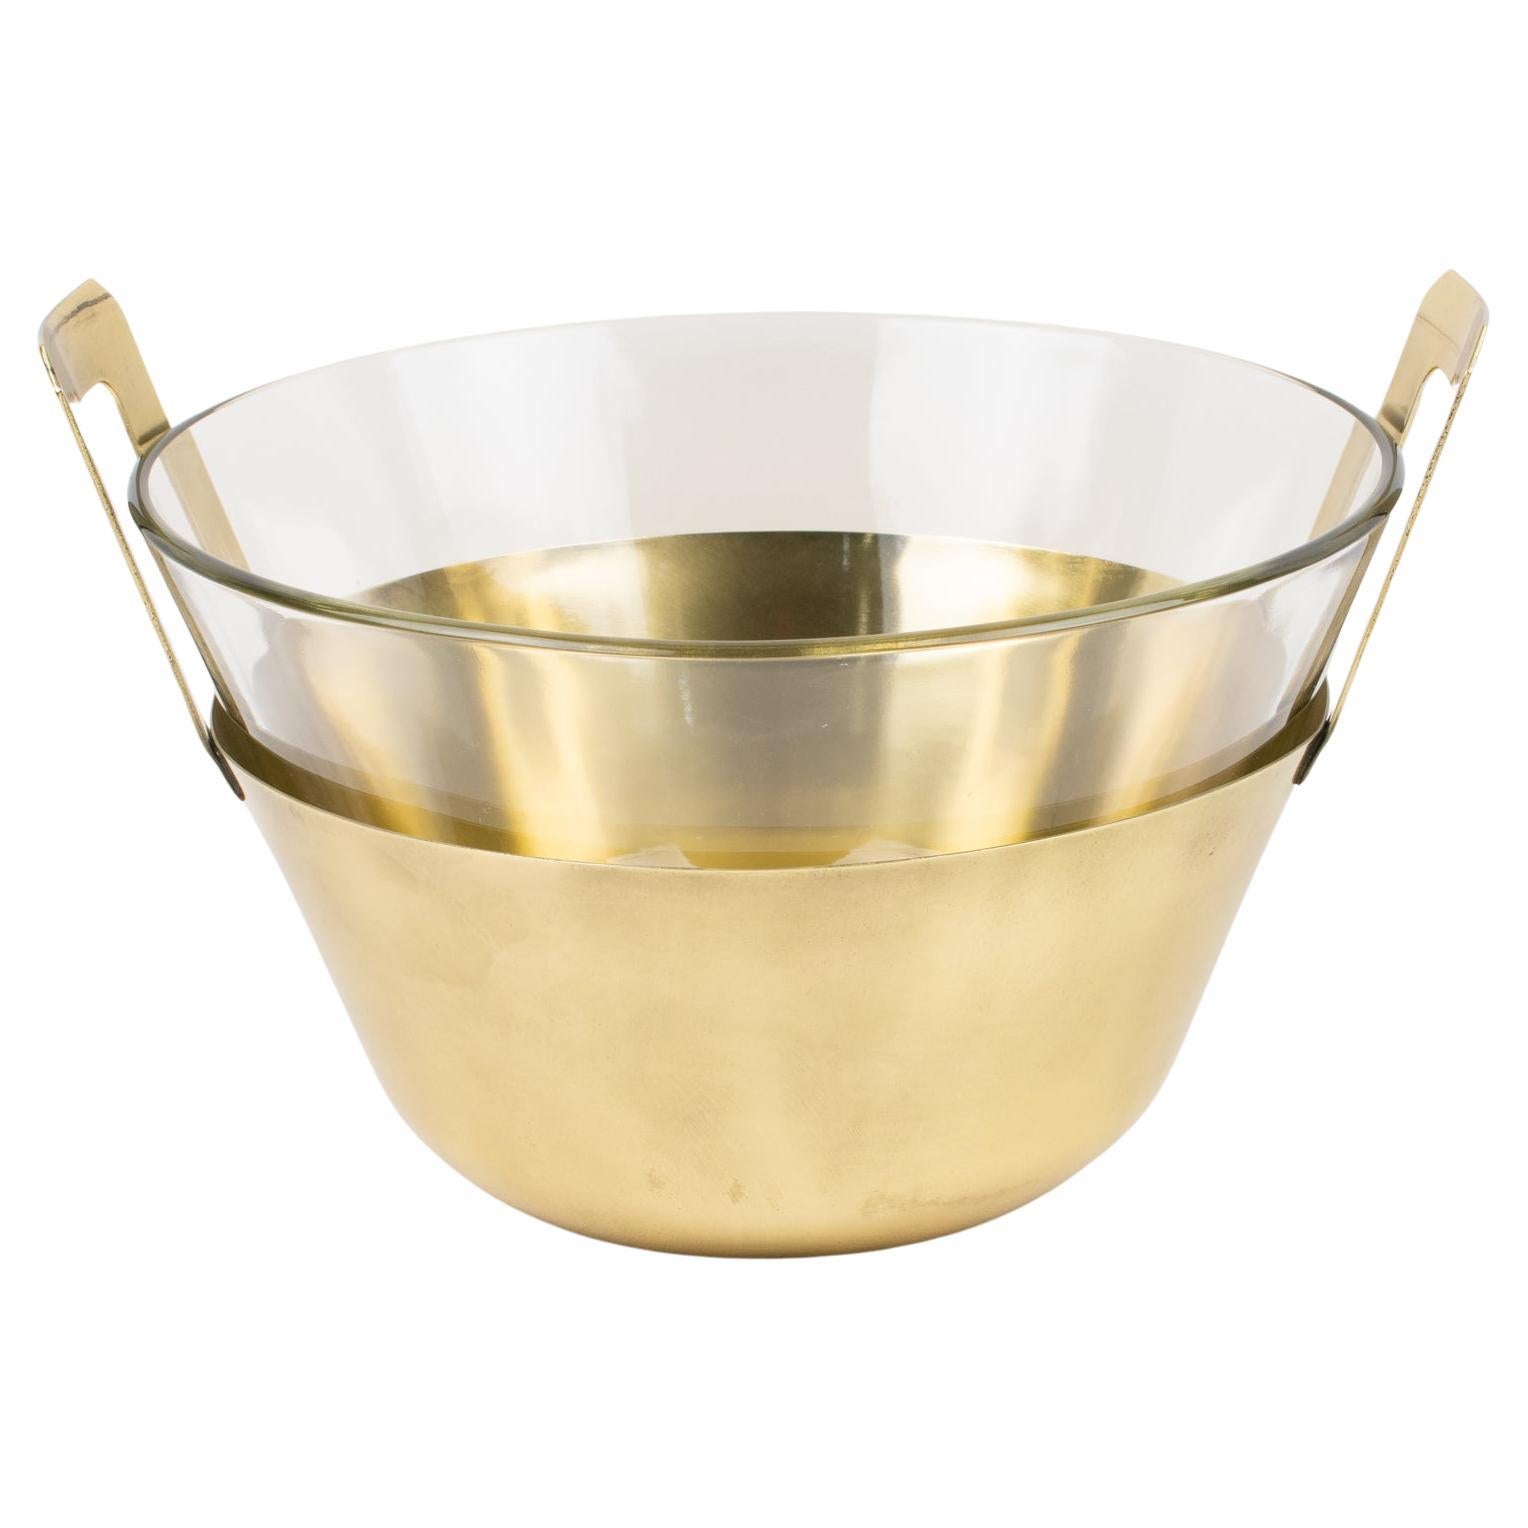 Modernist Gilt Metal and Glass Decorative Bowl Centerpiece, 1980s For Sale